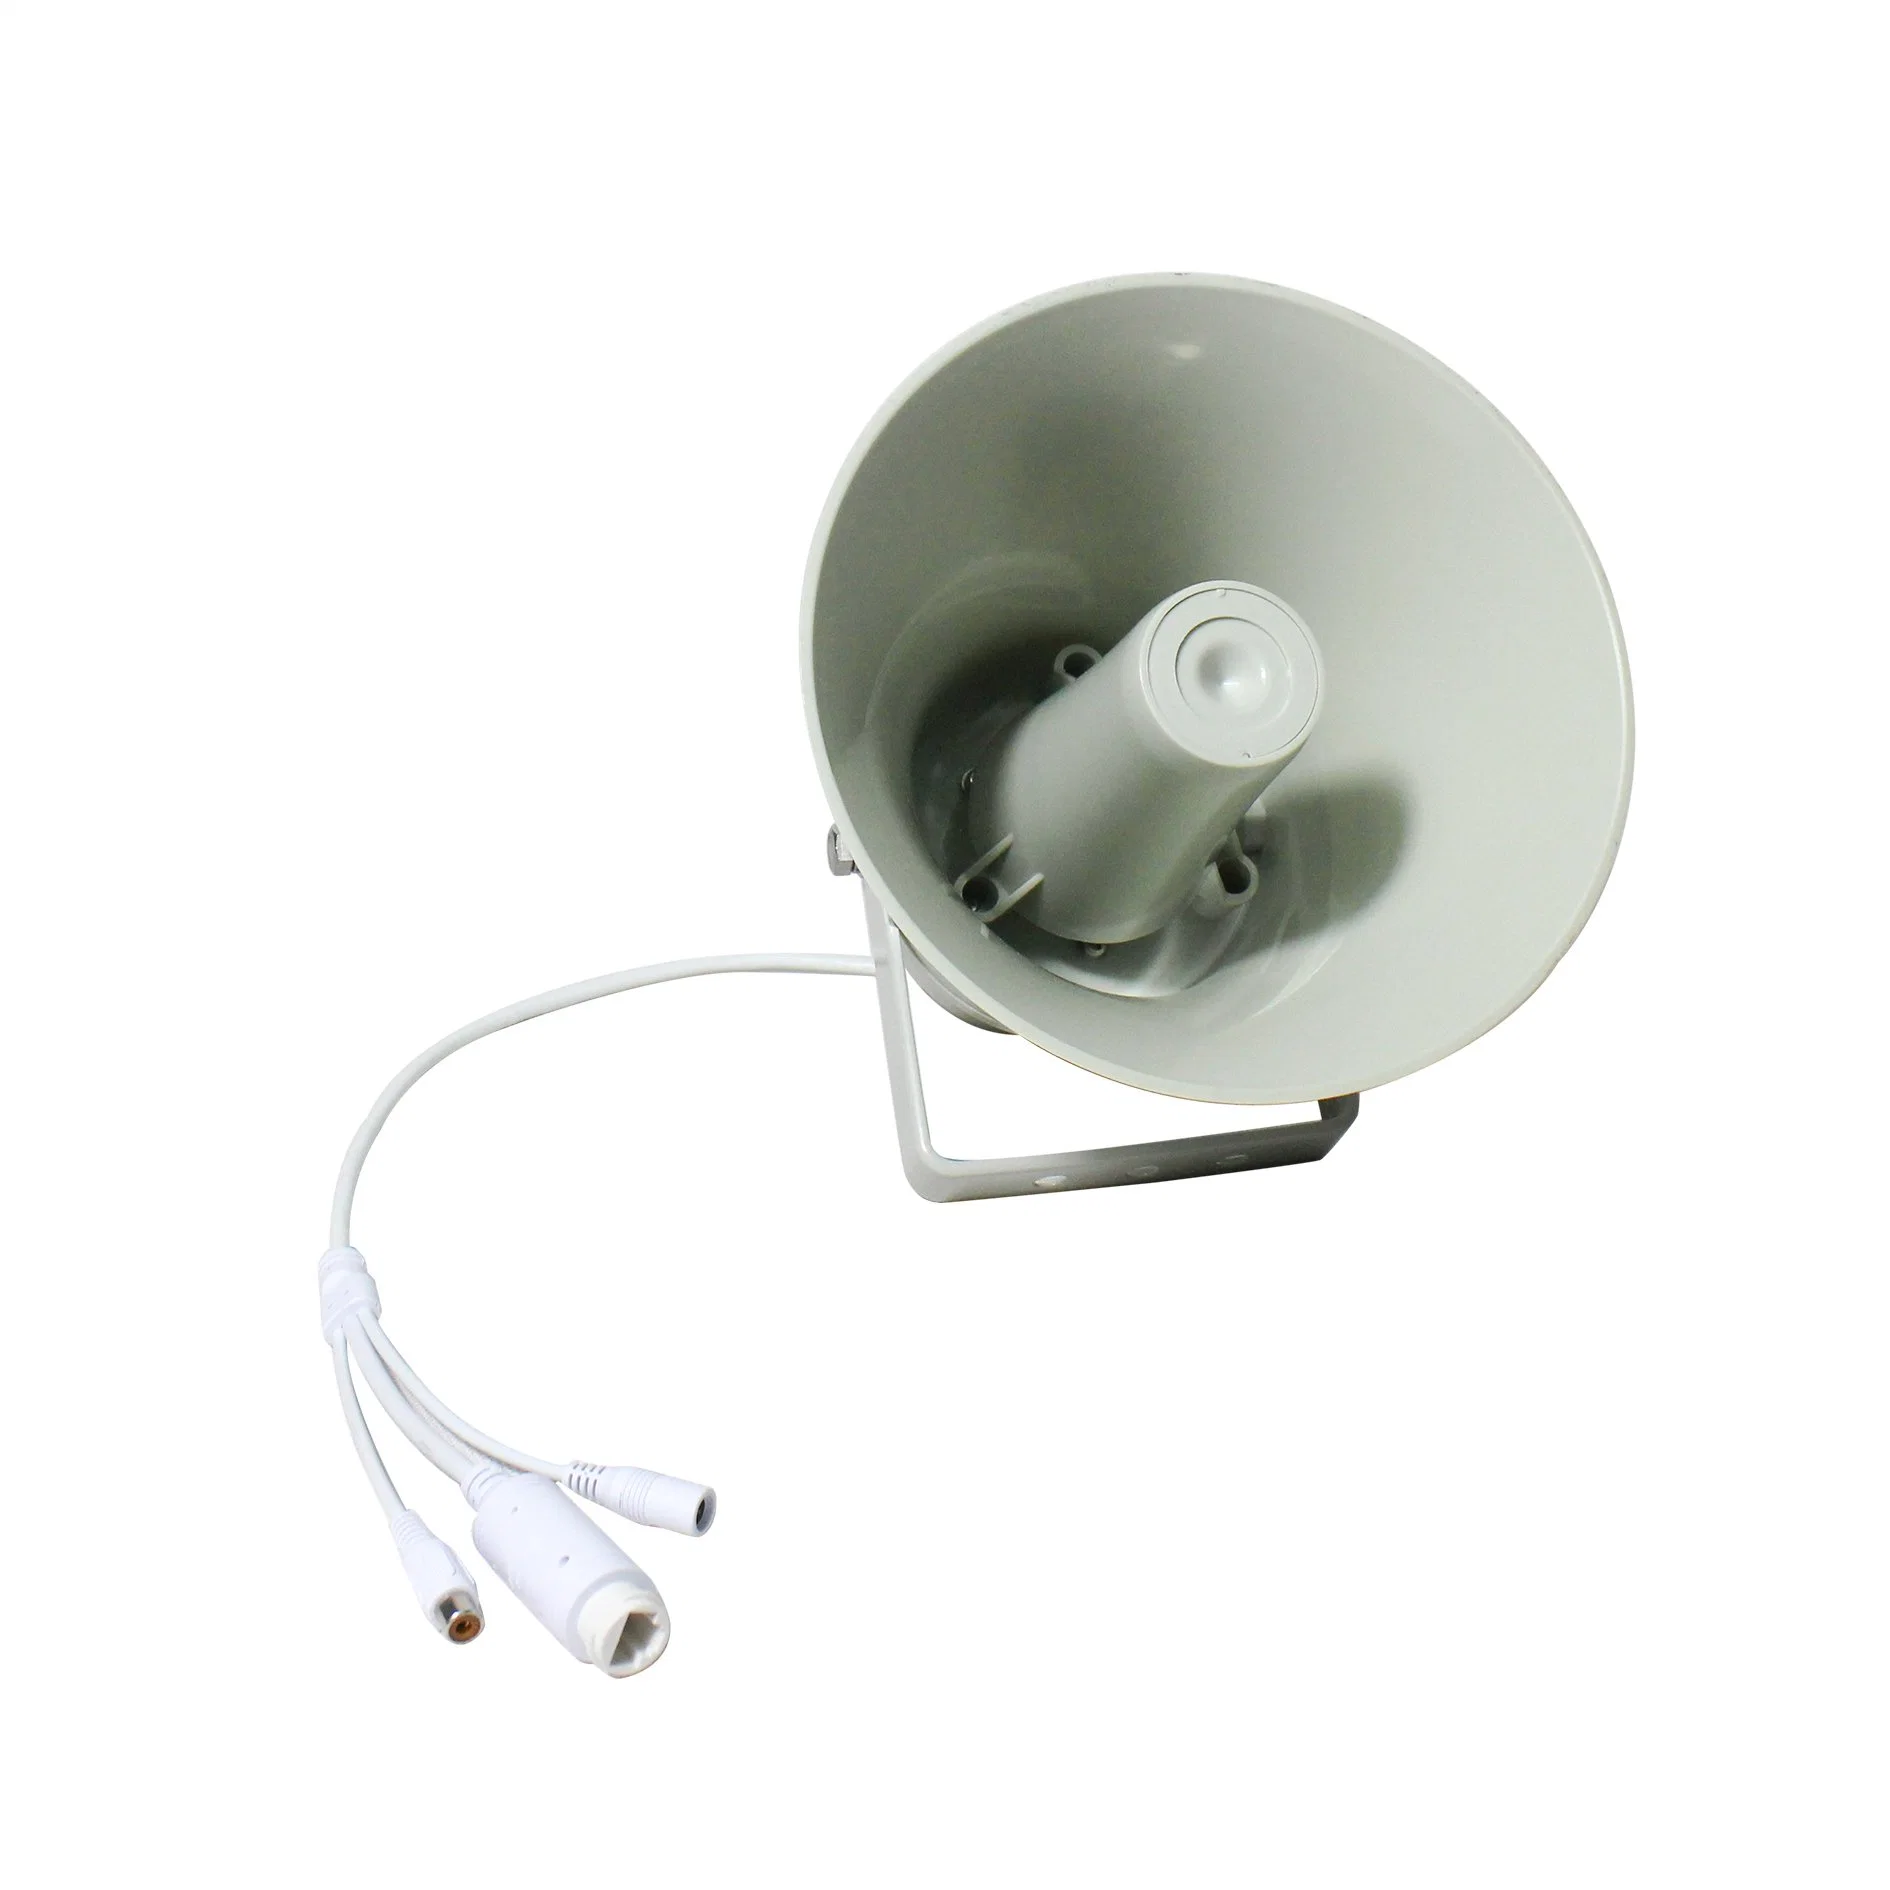 SIP Network Horn Speaker 15W (TCP/IP) , Supports Poe Power Supply with Dry Contact to Connect with IP Camera